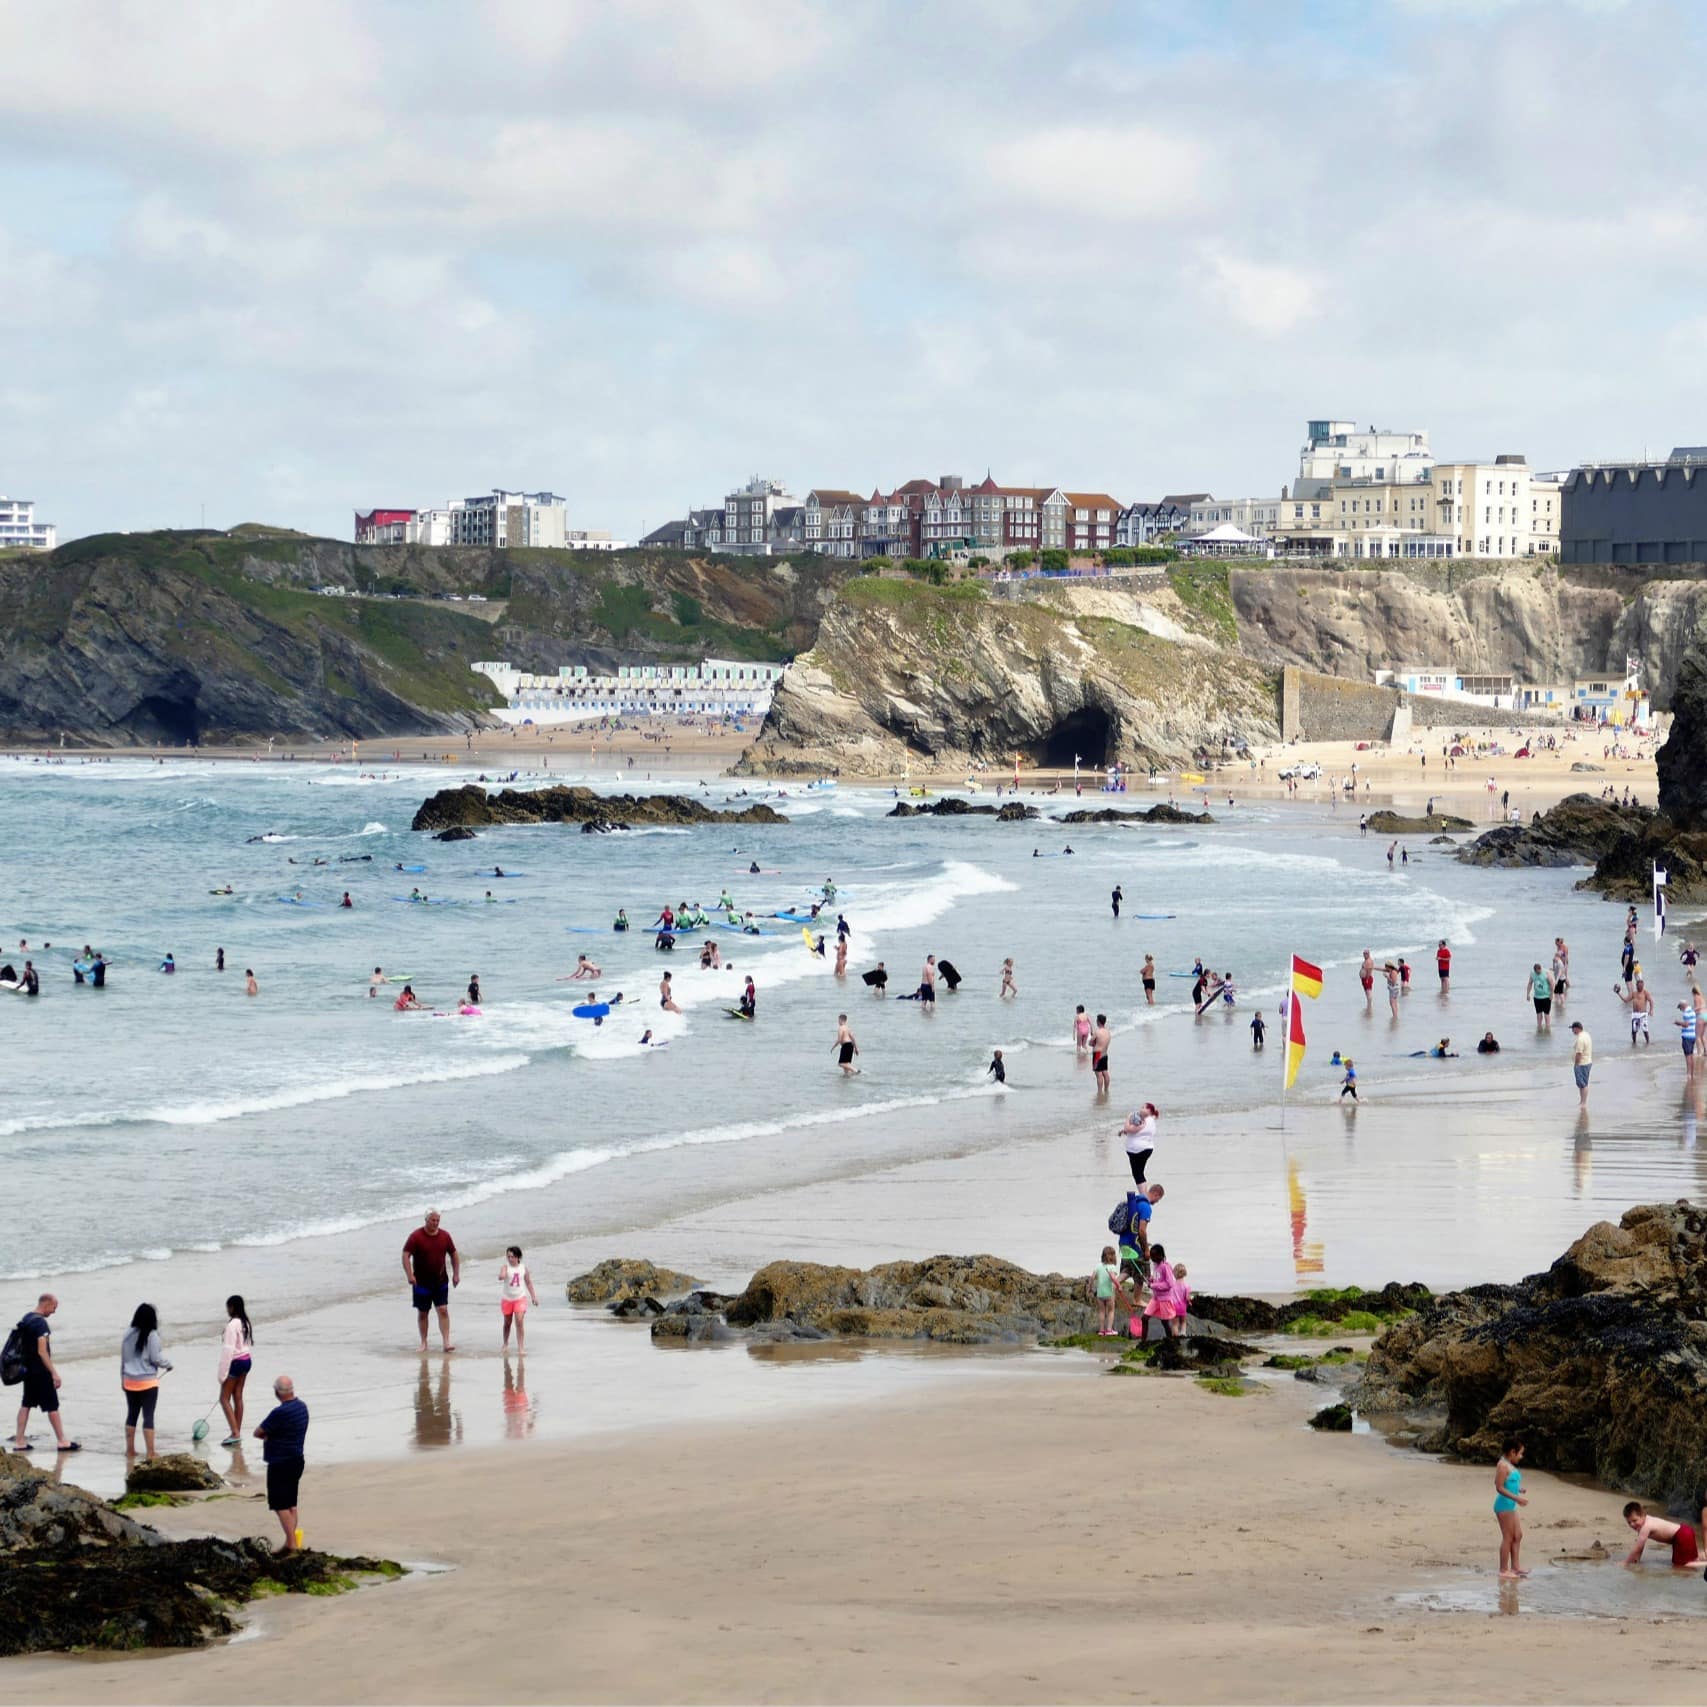 The beach in Newquay, Cornwall